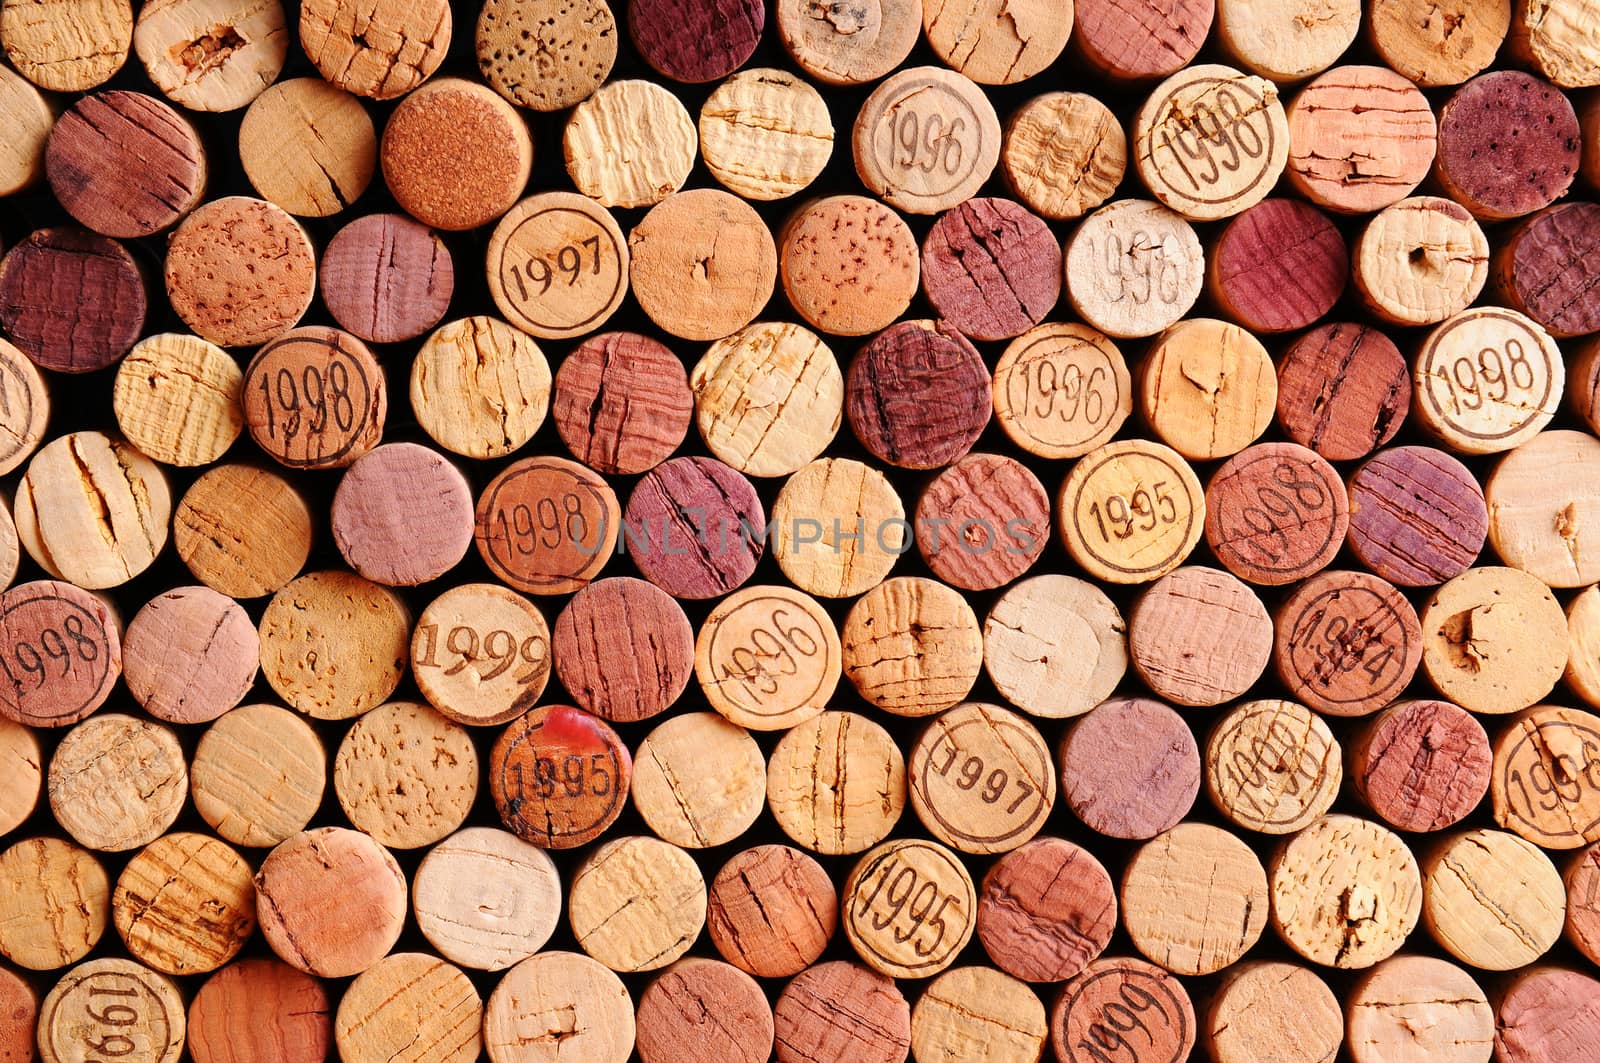 Closeup of a wall of used wine corks. A random selection of use wine corks, some with vintage years. Horizontal format that fills the frame.